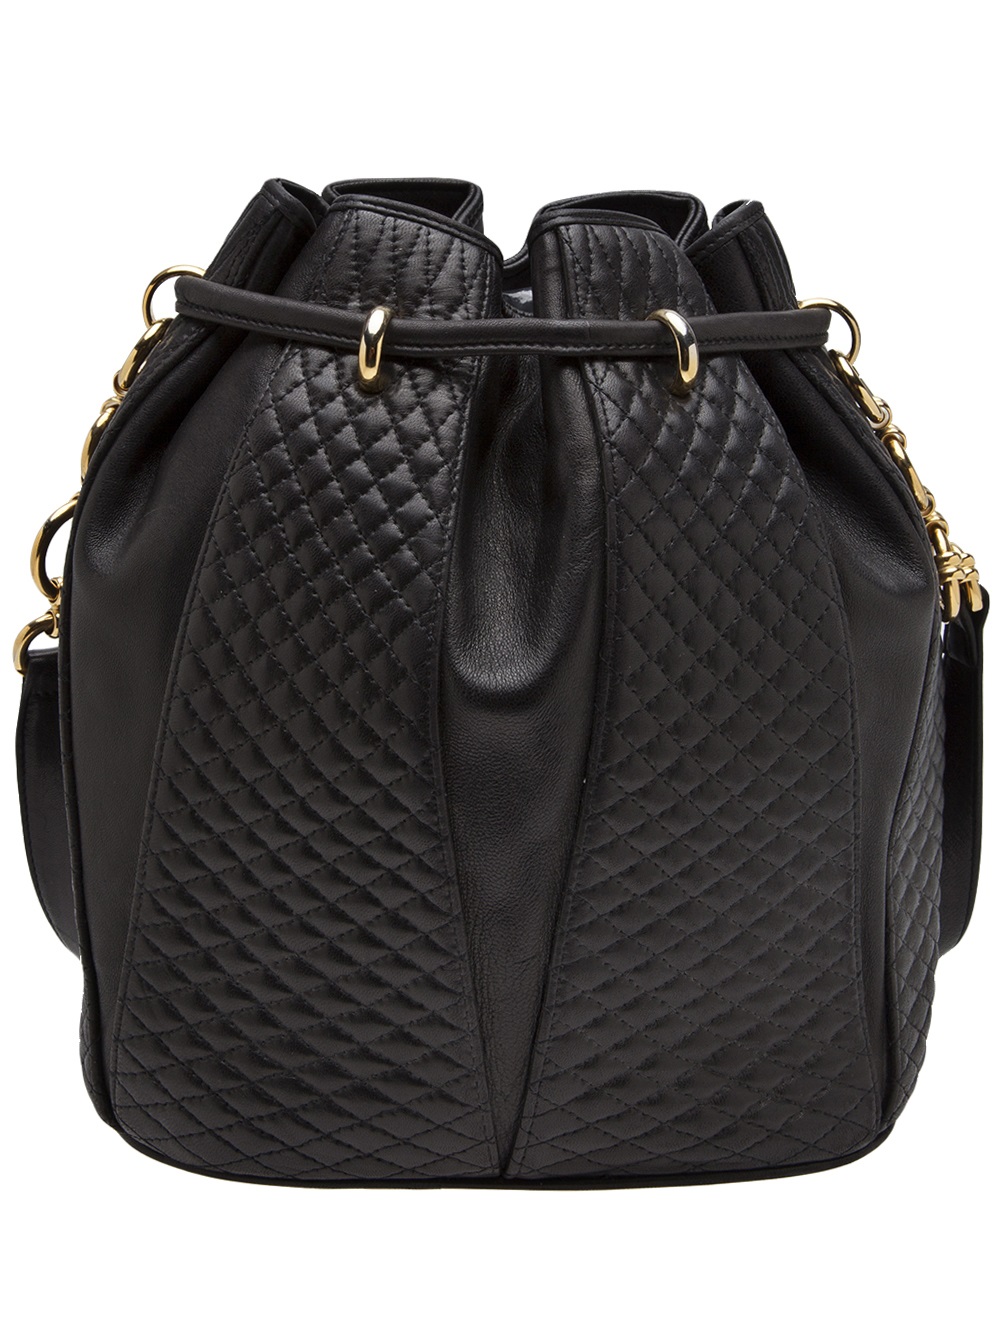 Bally, Bags, Bally Quilted Bag